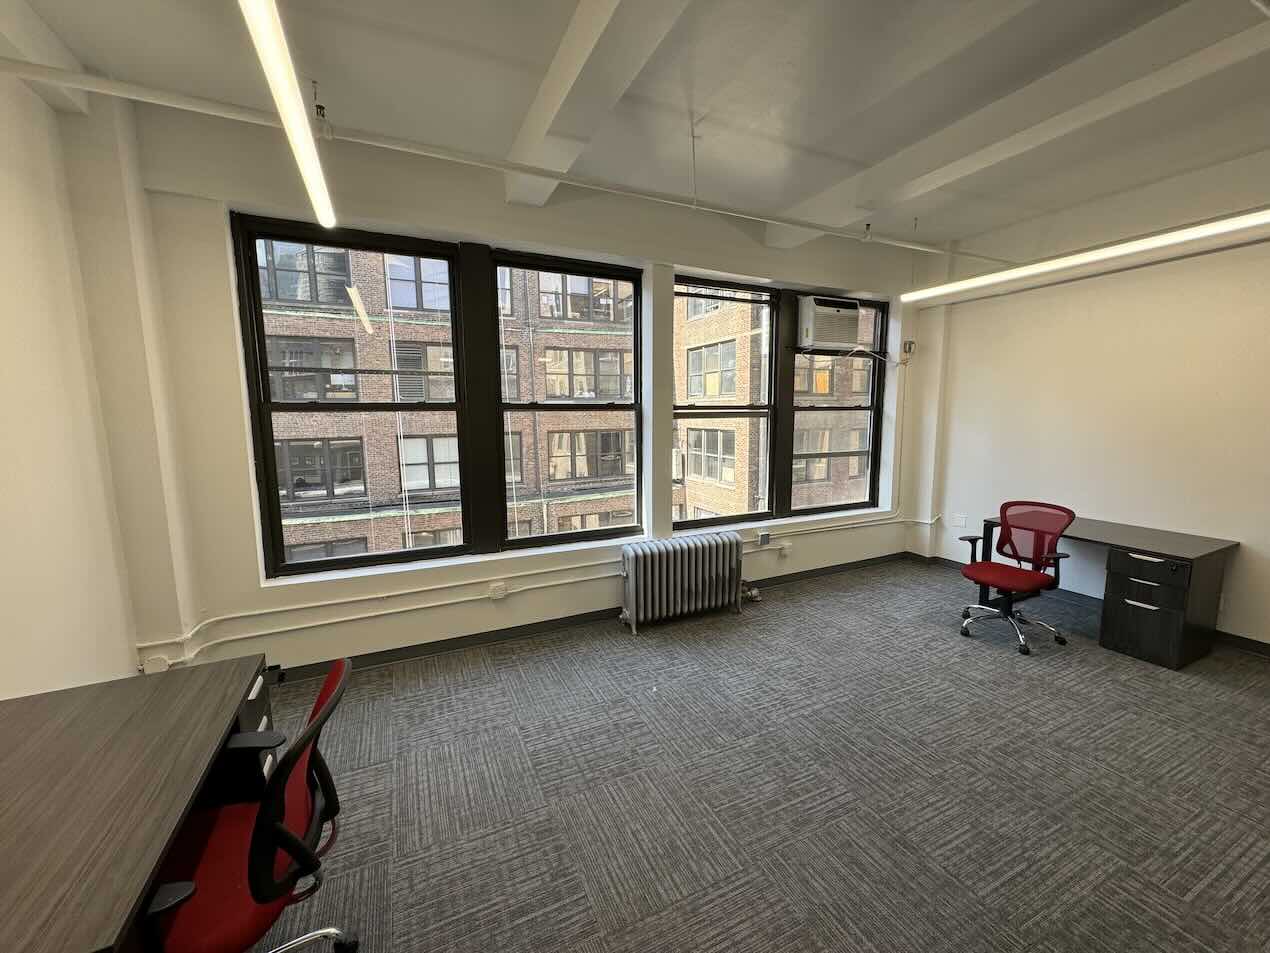 252 West 38th Street Office - Overview of the Office Space